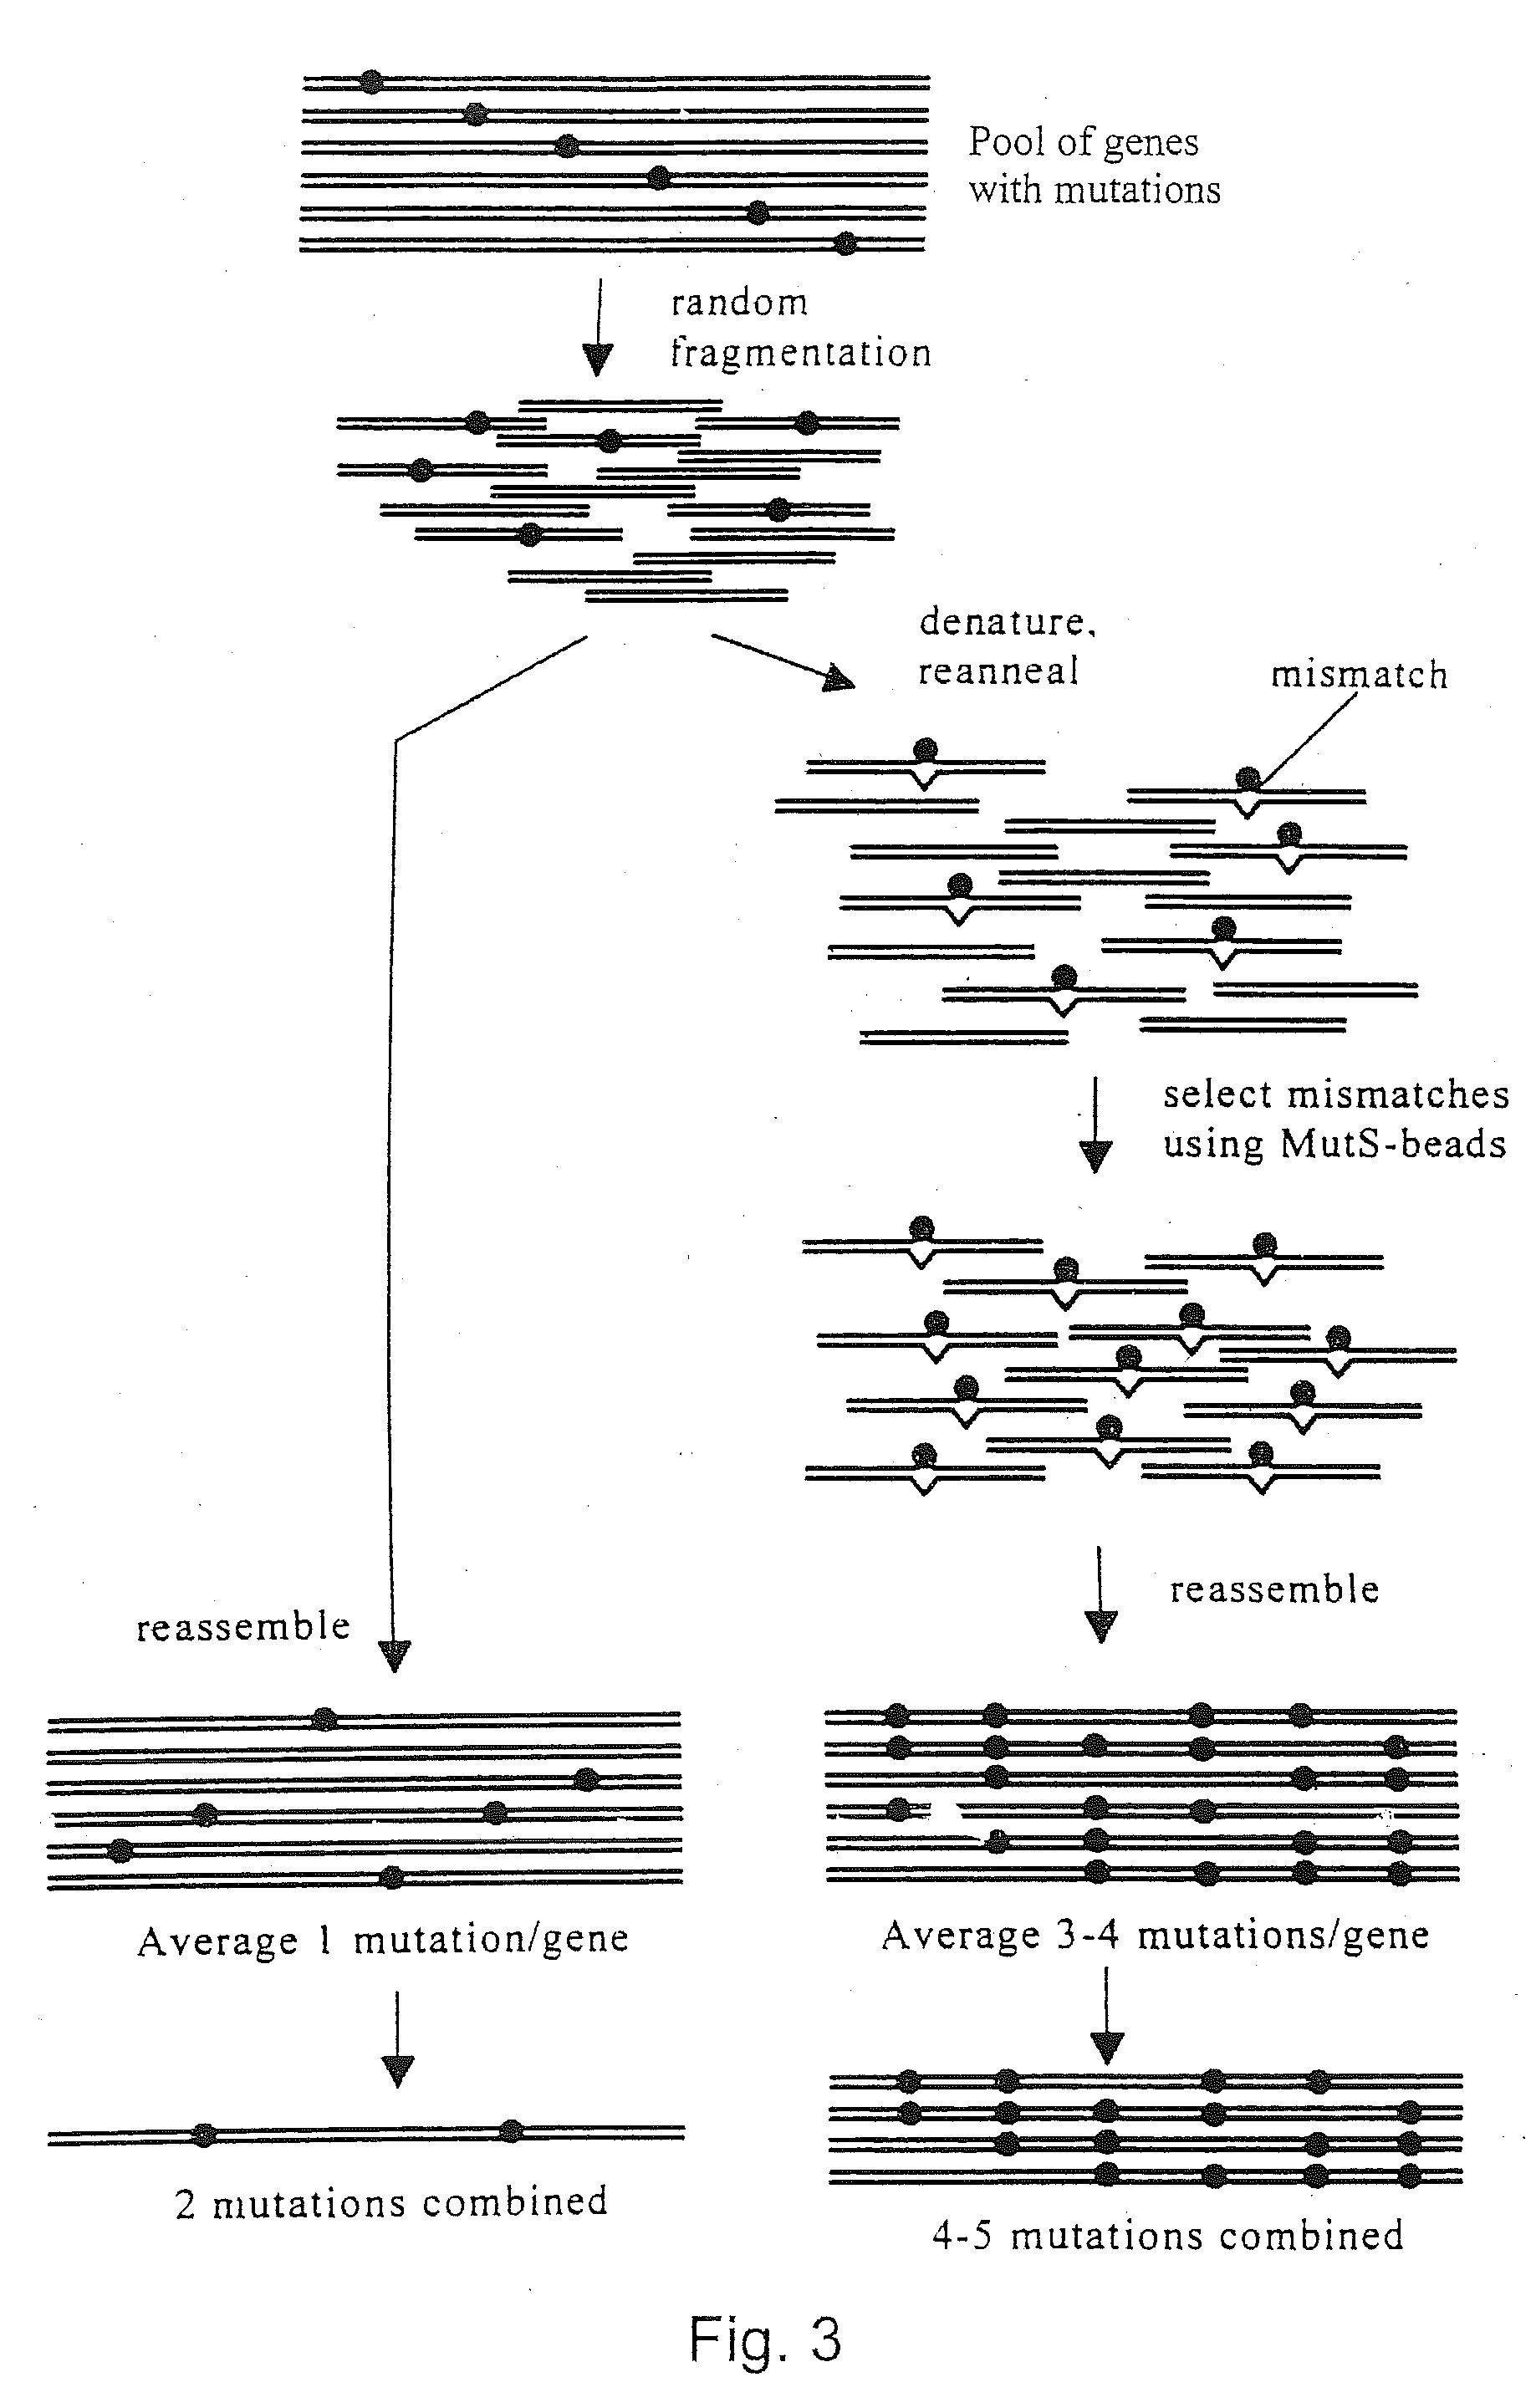 Evolution of whole cells and organisms by recursive sequence recombination